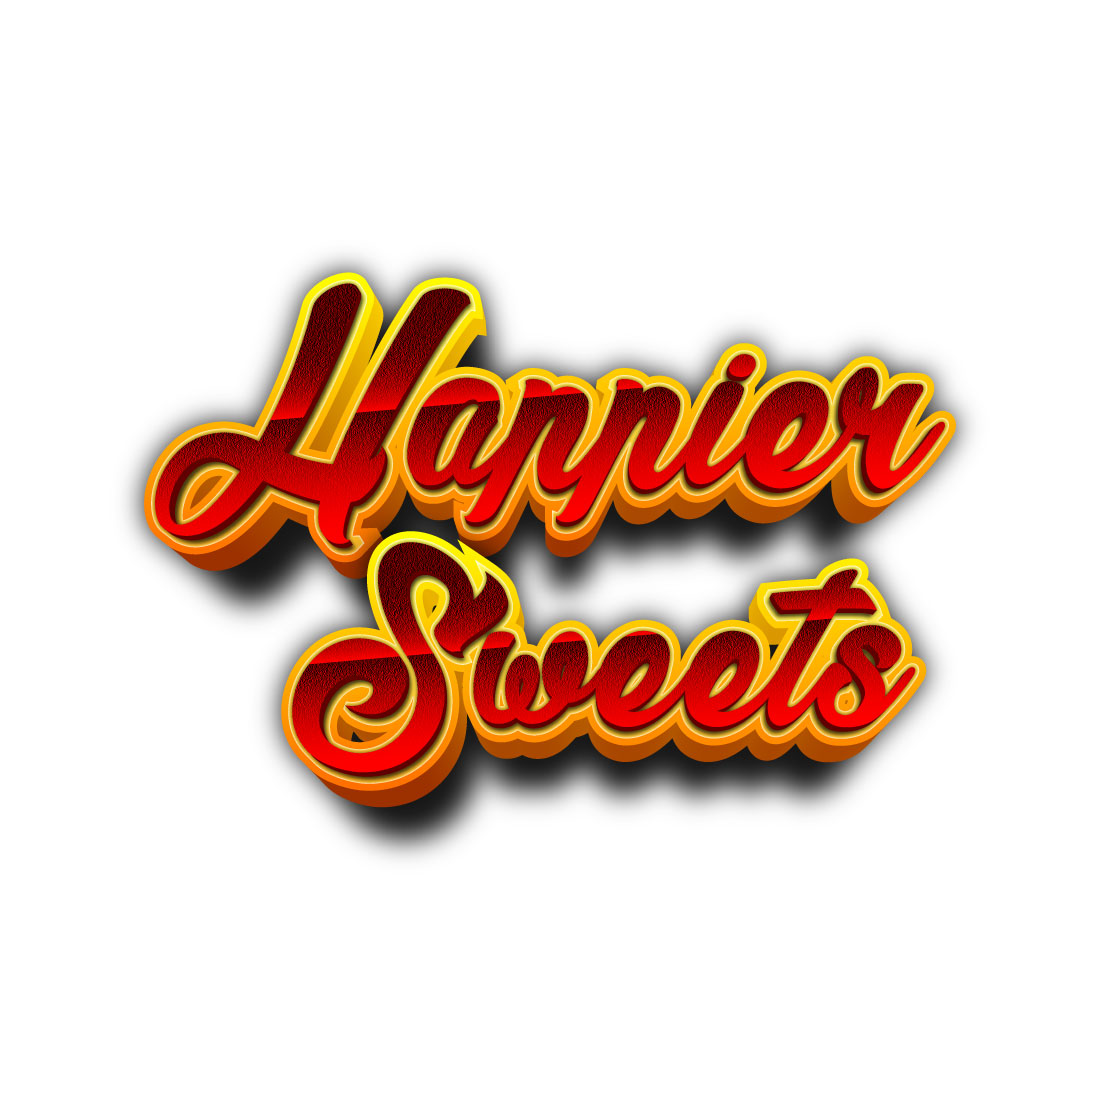 Beautiful Candy Logo cover image.